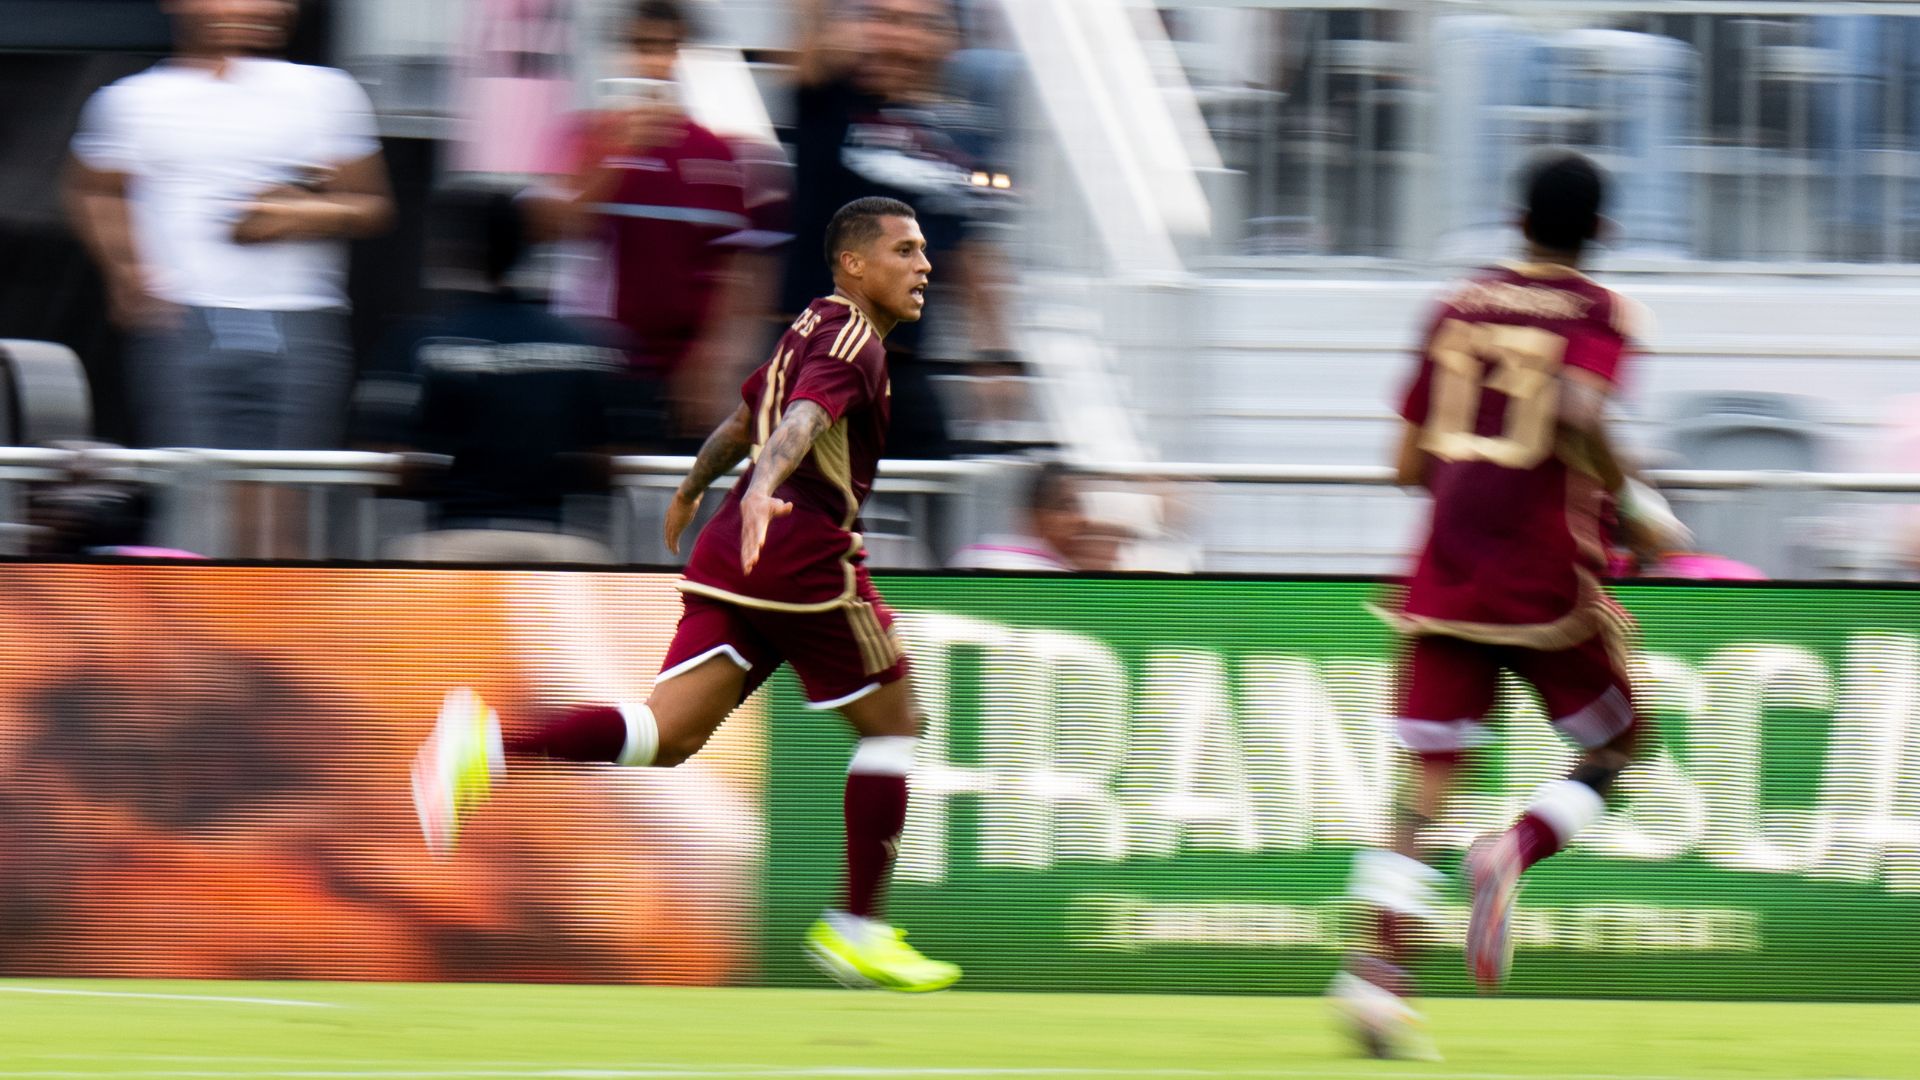 Machis scored Venezuela's goal in the first half (Credit: Getty Images)